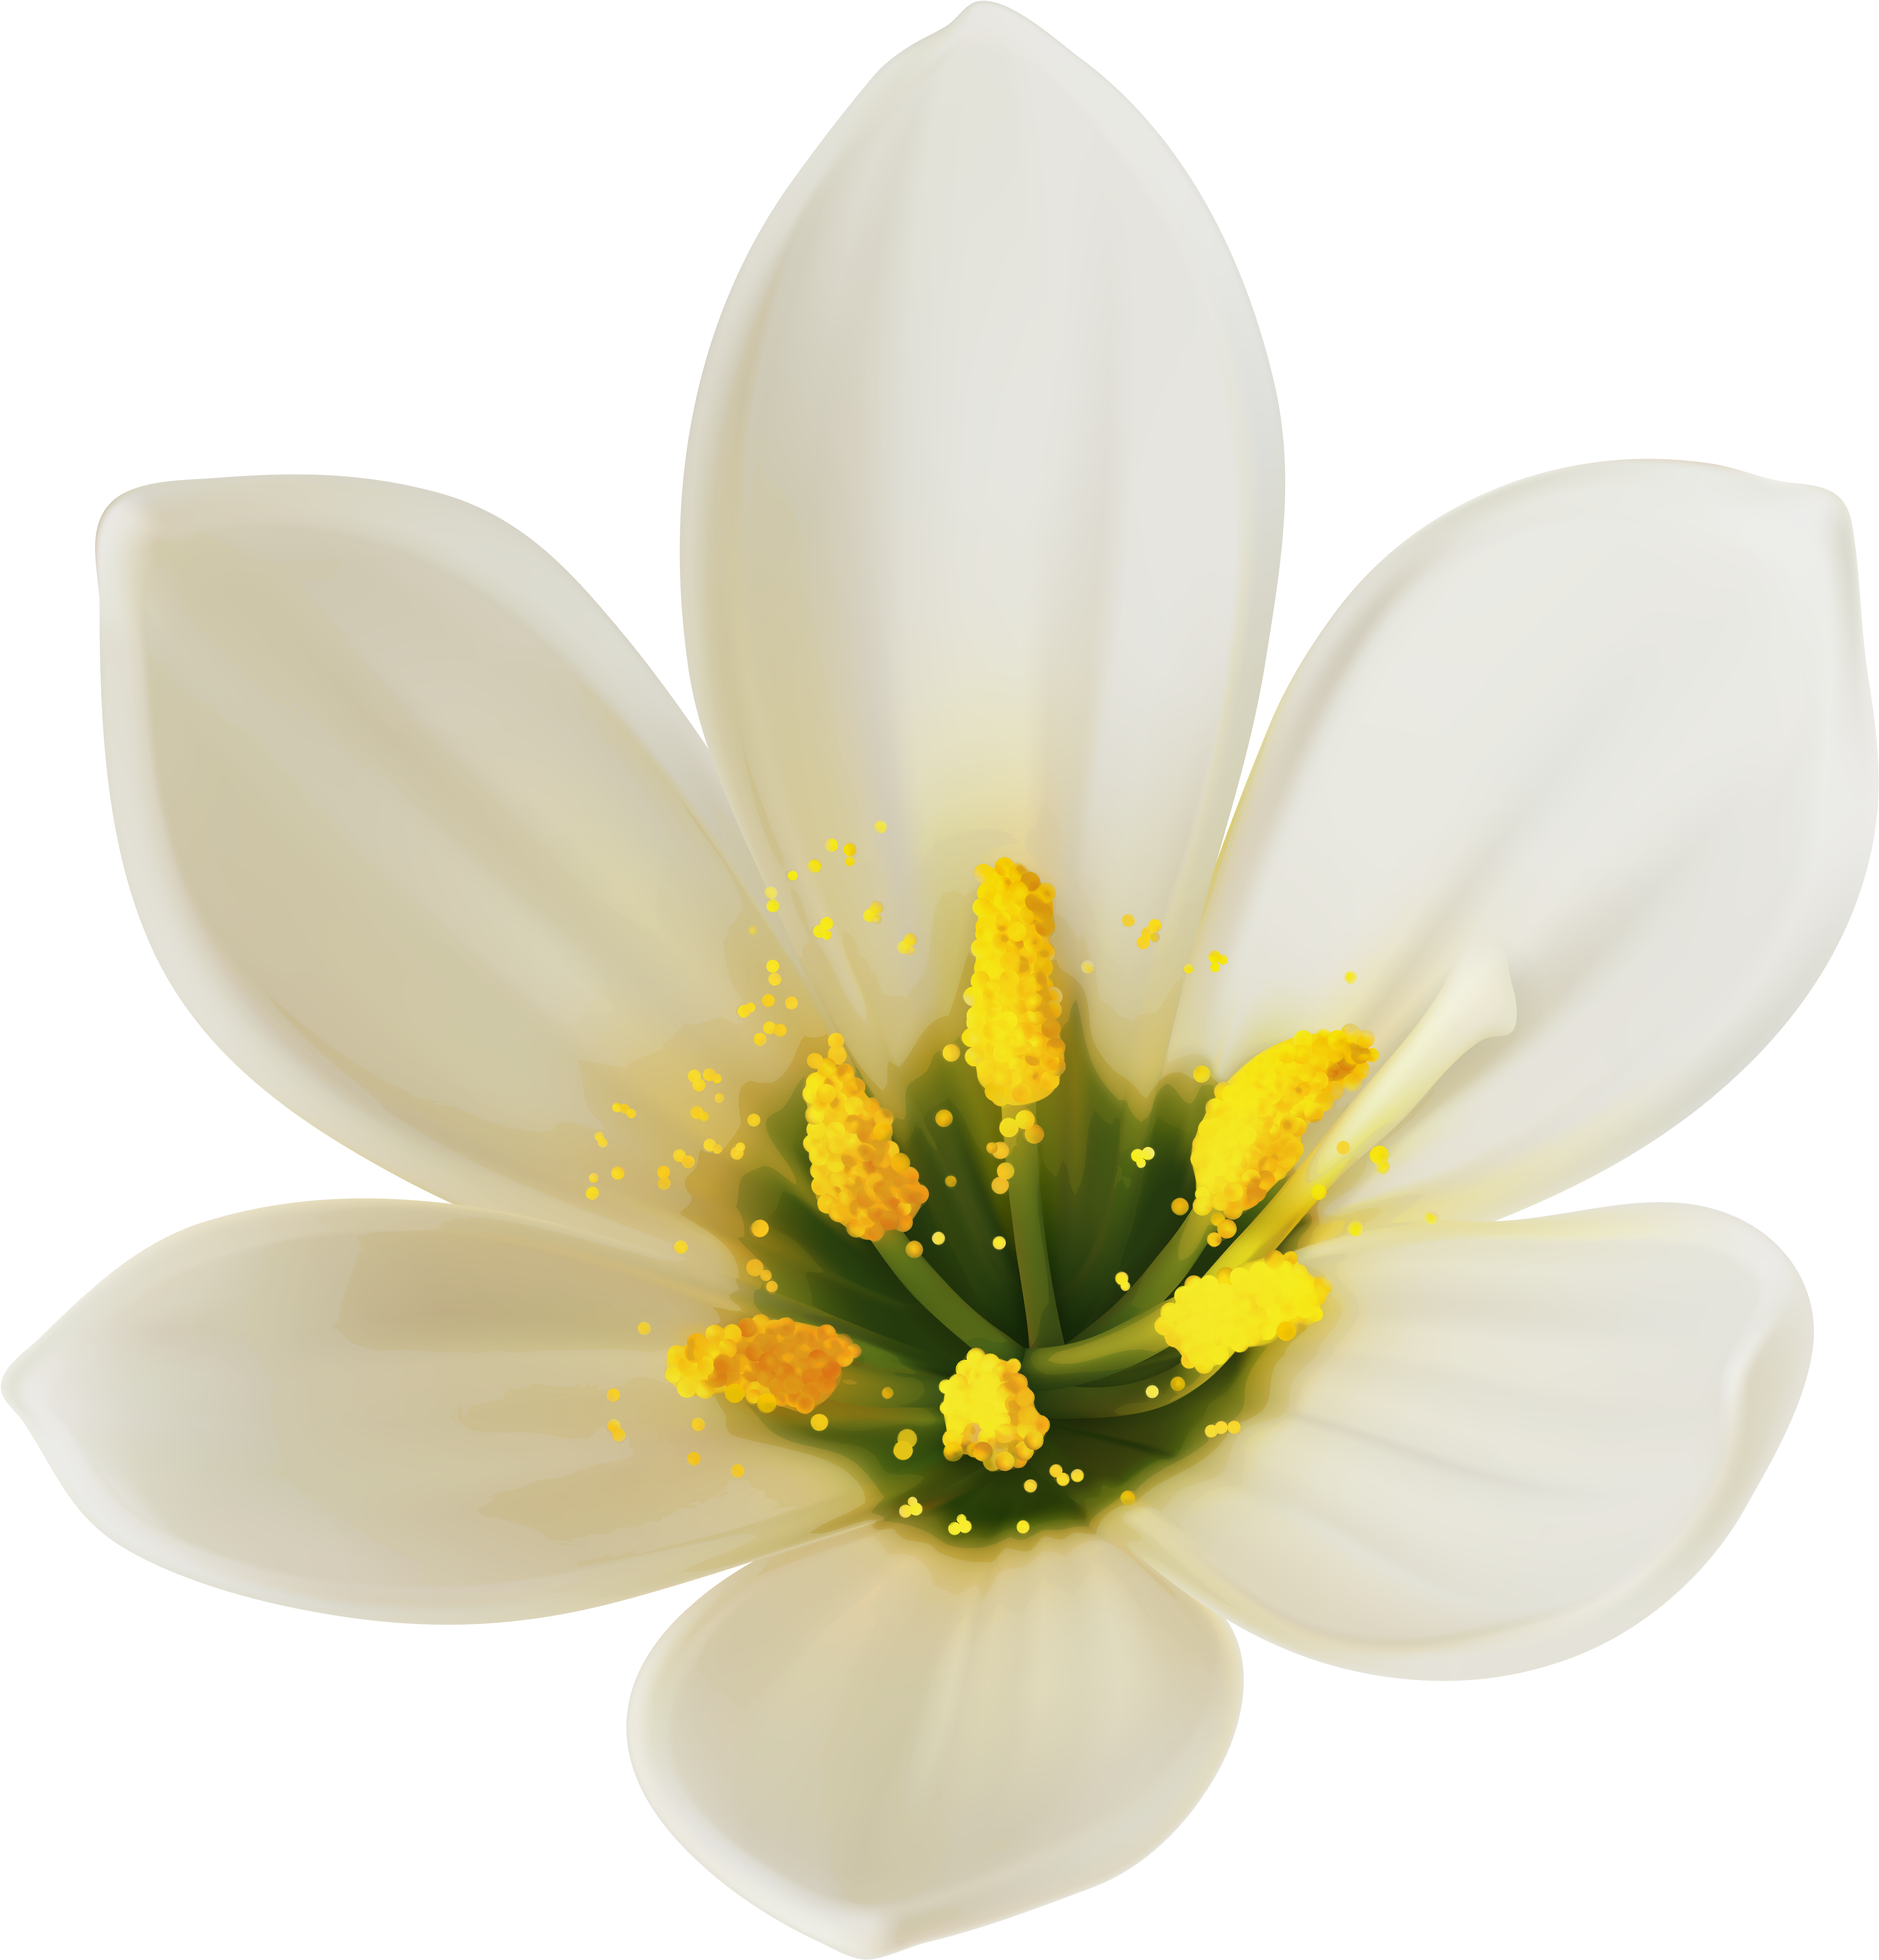 White Flower - Happy New Month Messages (5877x6098)